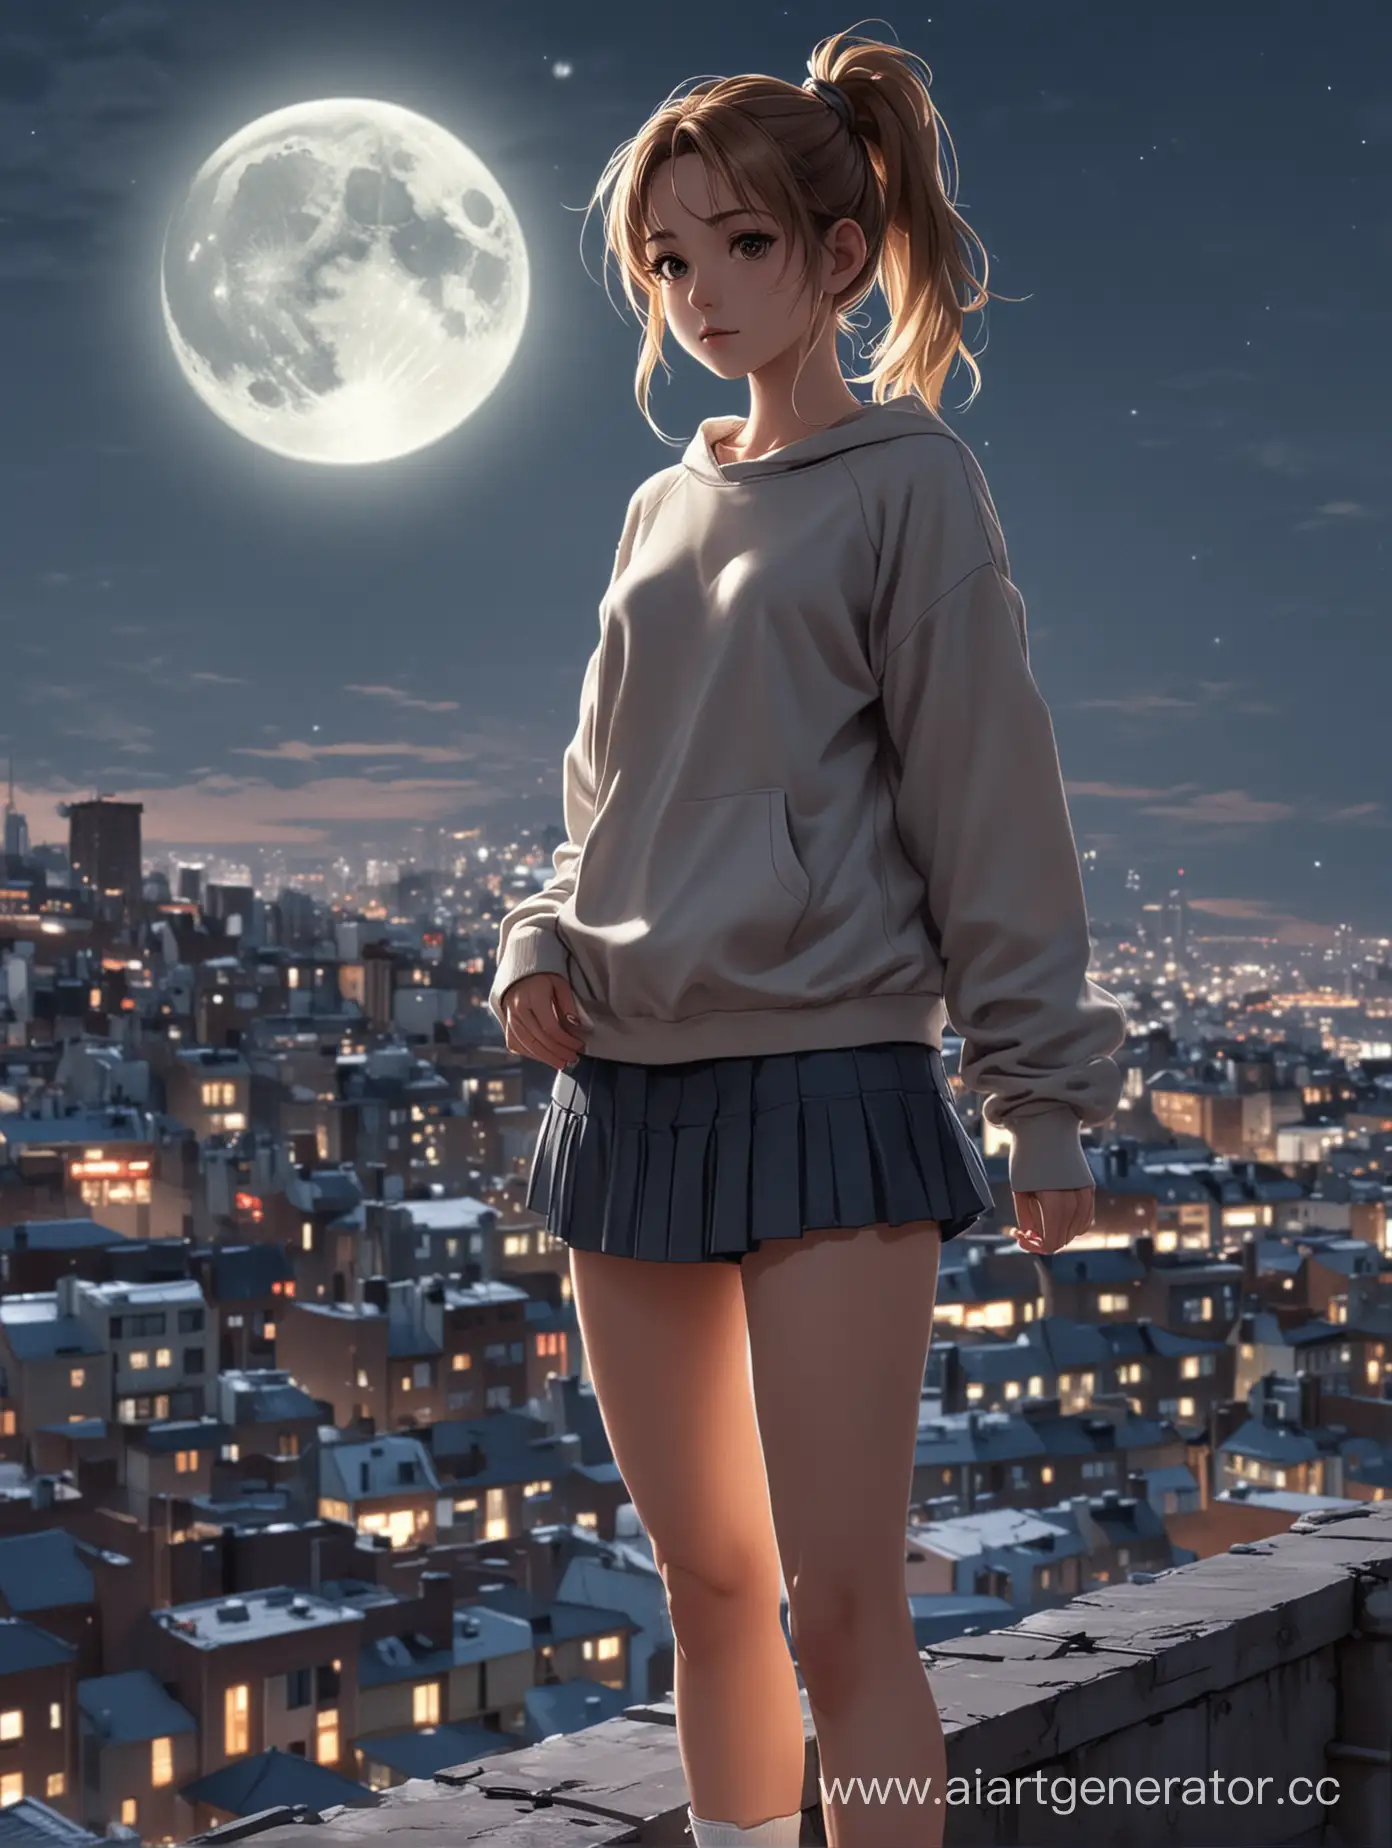 Anime-Girl-Standing-on-Rooftop-Overlooking-Cityscape-at-Night